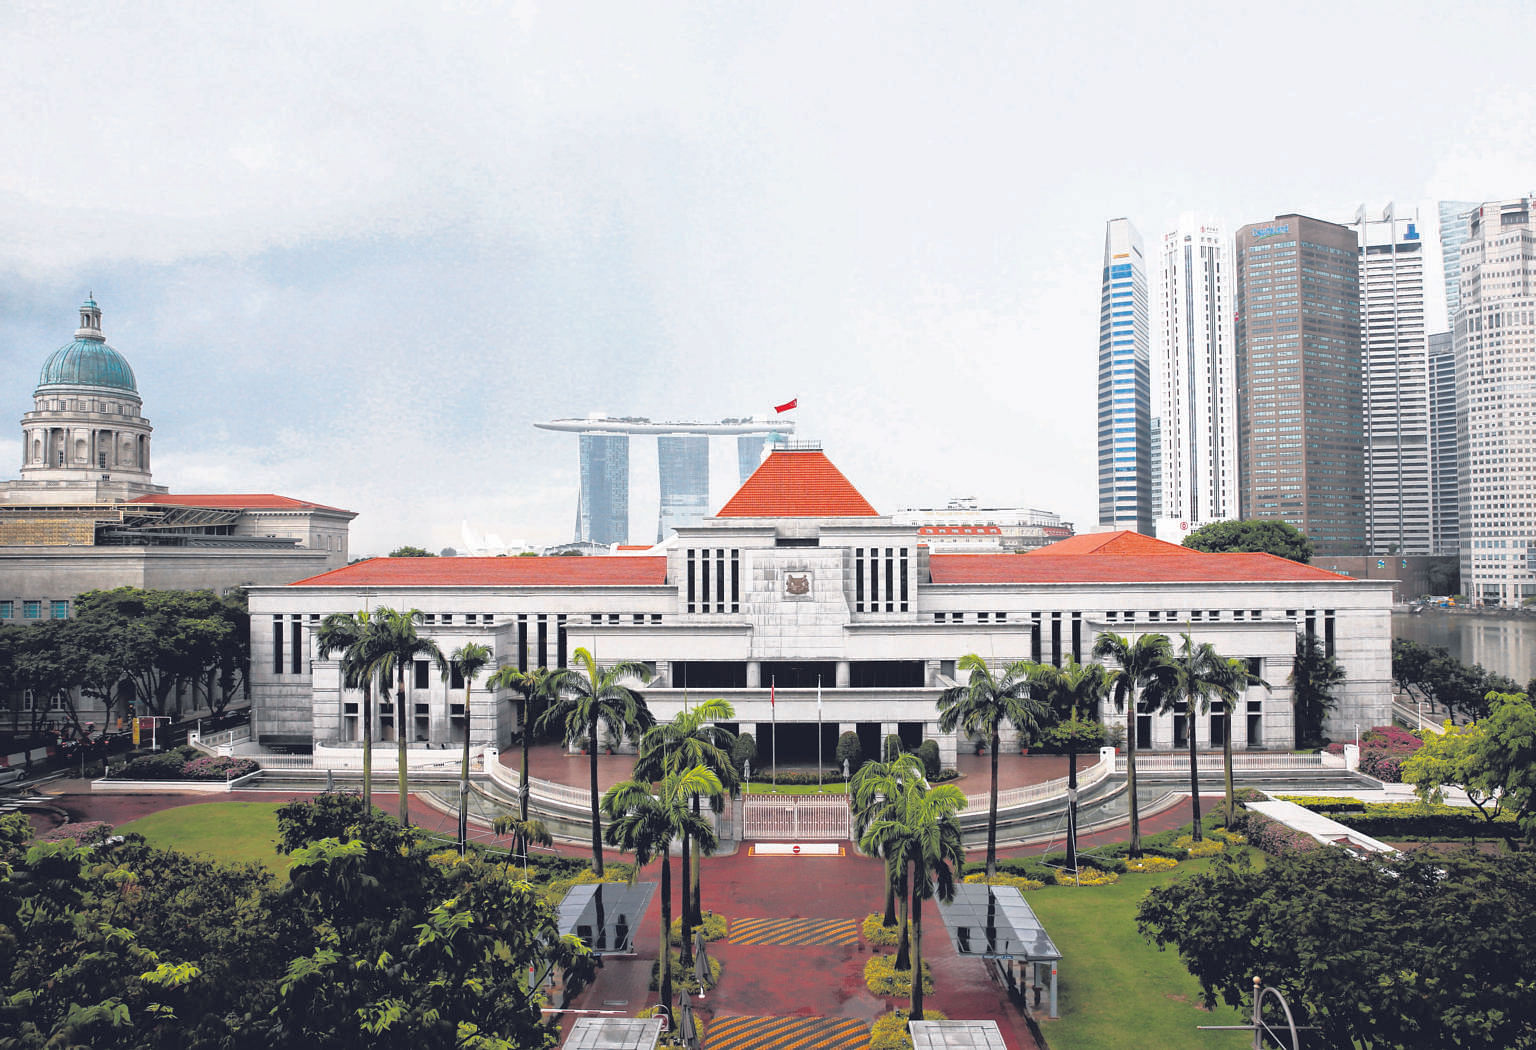 Singapore's Parliament House. Founding Prime Minister Lee Kuan Yew once described the trust between government and people as the greatest asset.